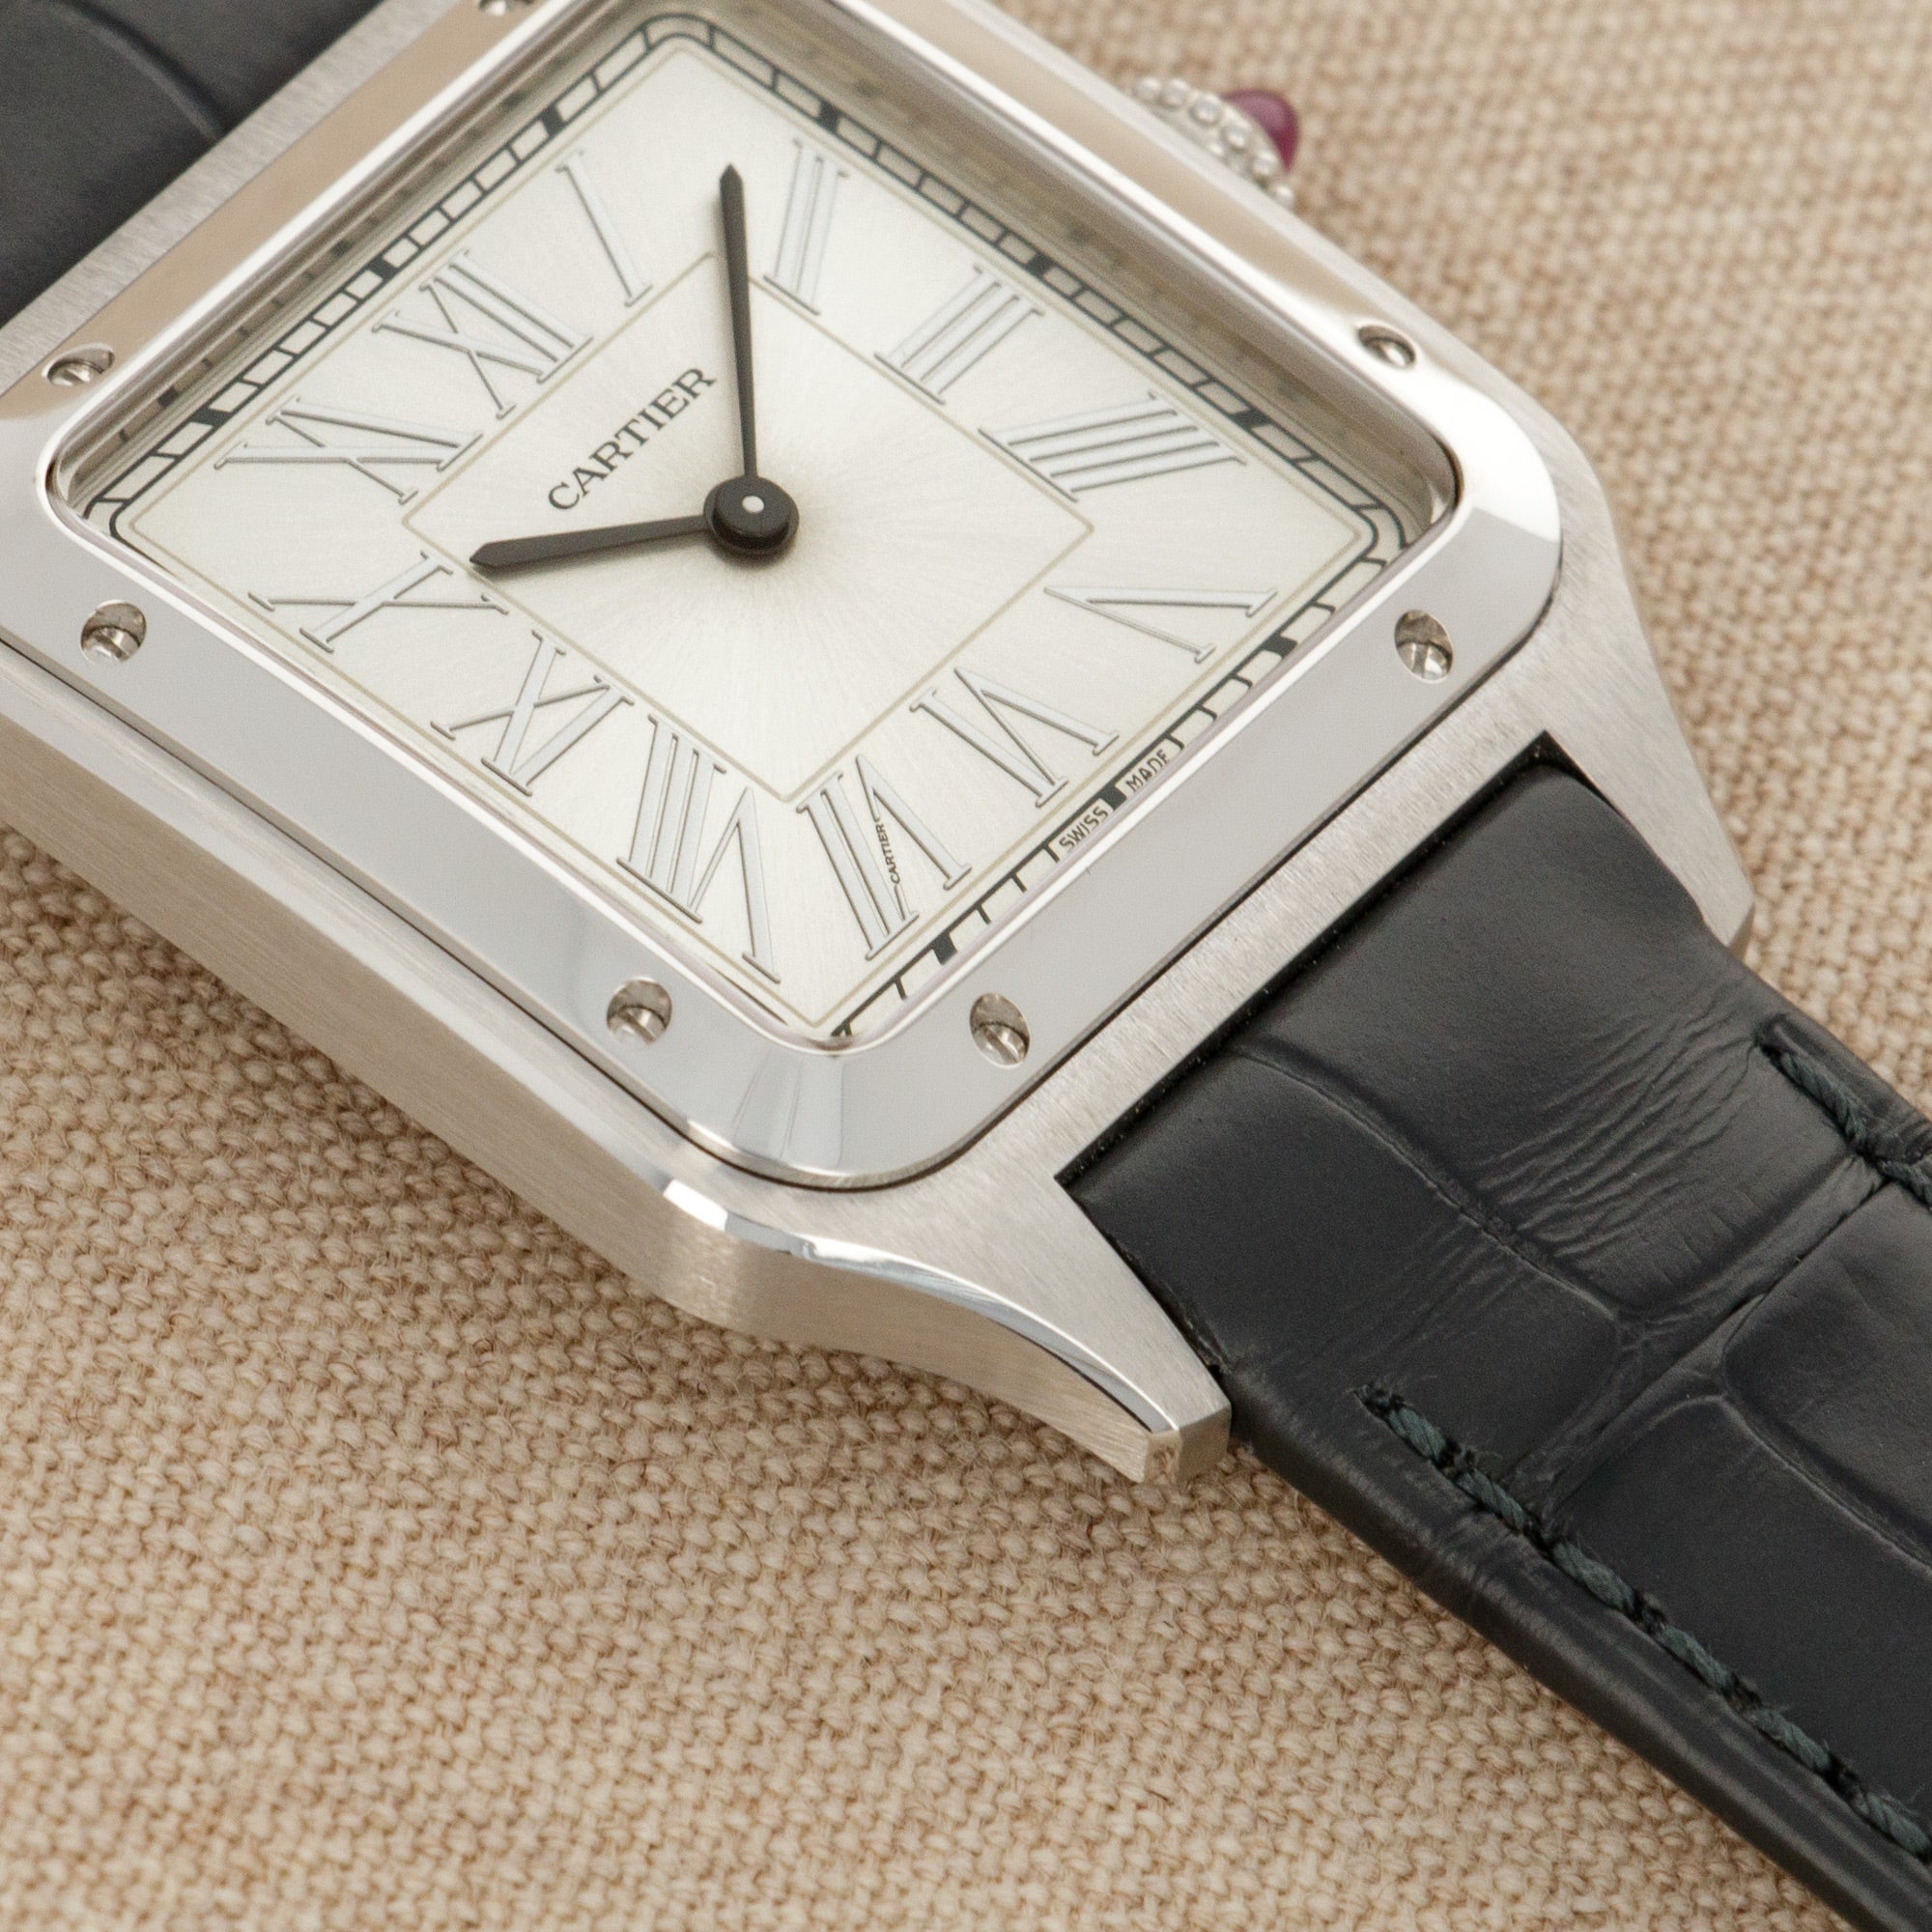 Cartier - Cartier Platinum Santos-Dumont Le Bresil Tank Ref. WGSA0034, Limited Edition of 100 Pieces - The Keystone Watches